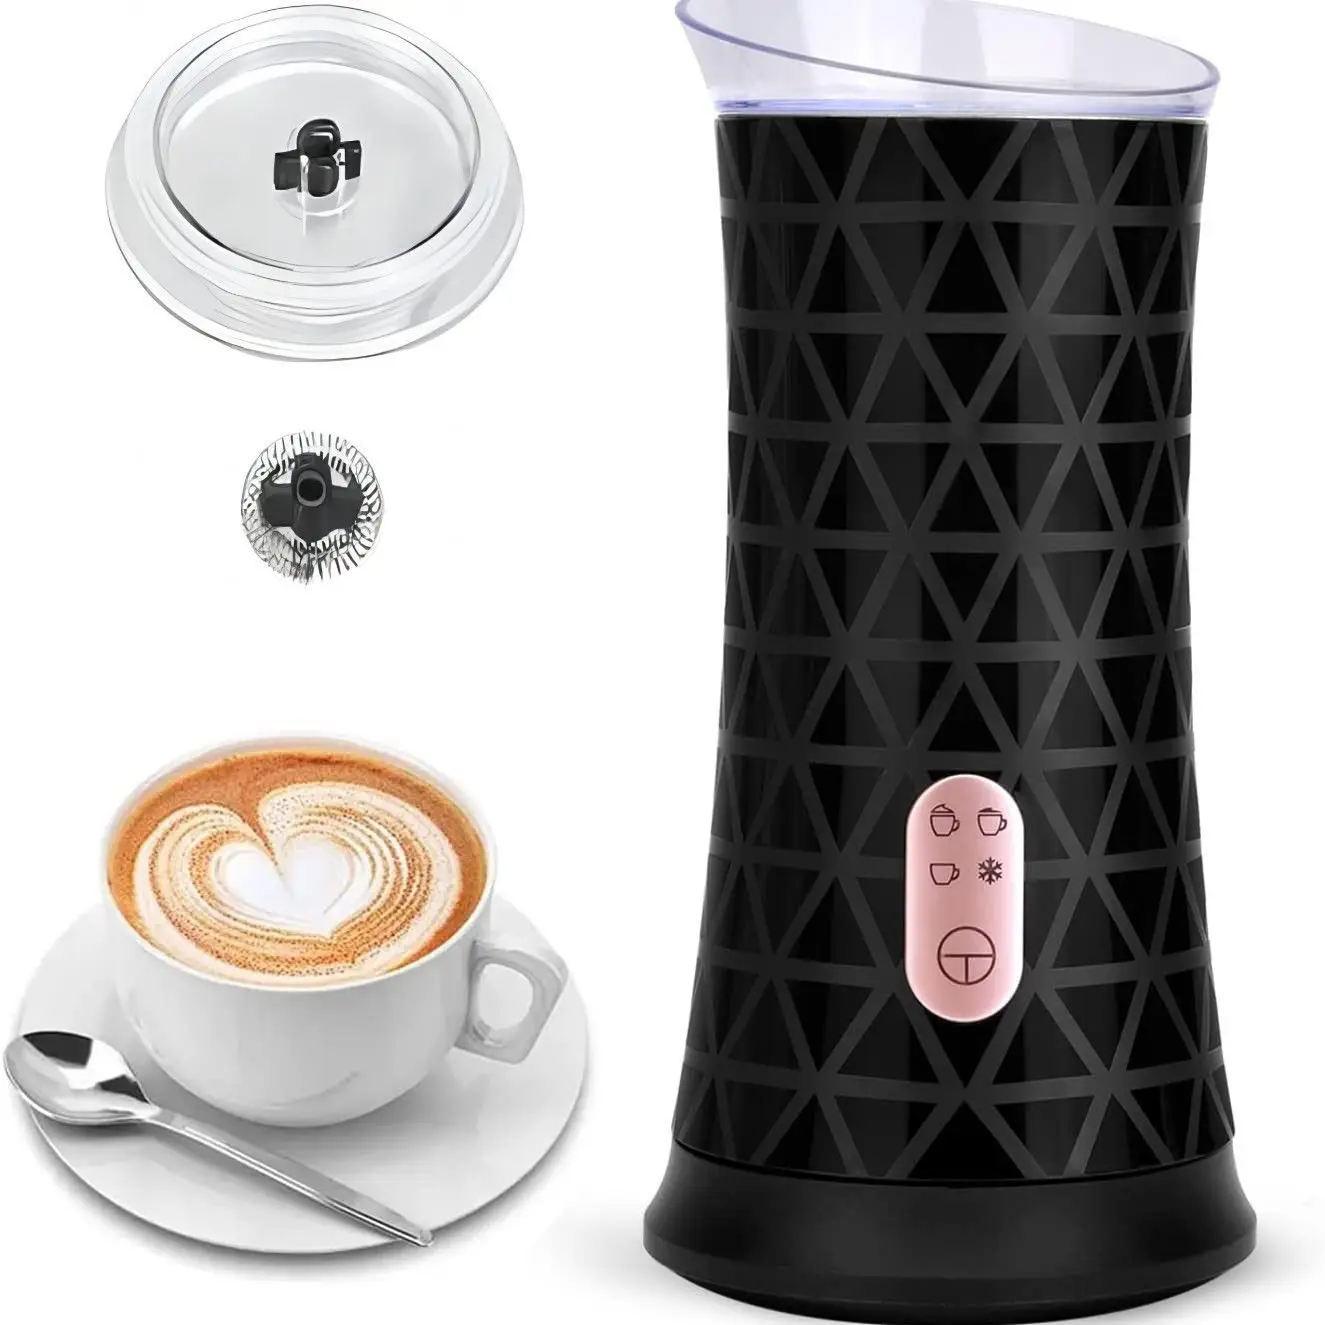 Automatic Hot and Cold Milk Frother Warmer for Latte Foam Maker Heated Milk Bubbler Stainless Steel Silent Coffee Maker